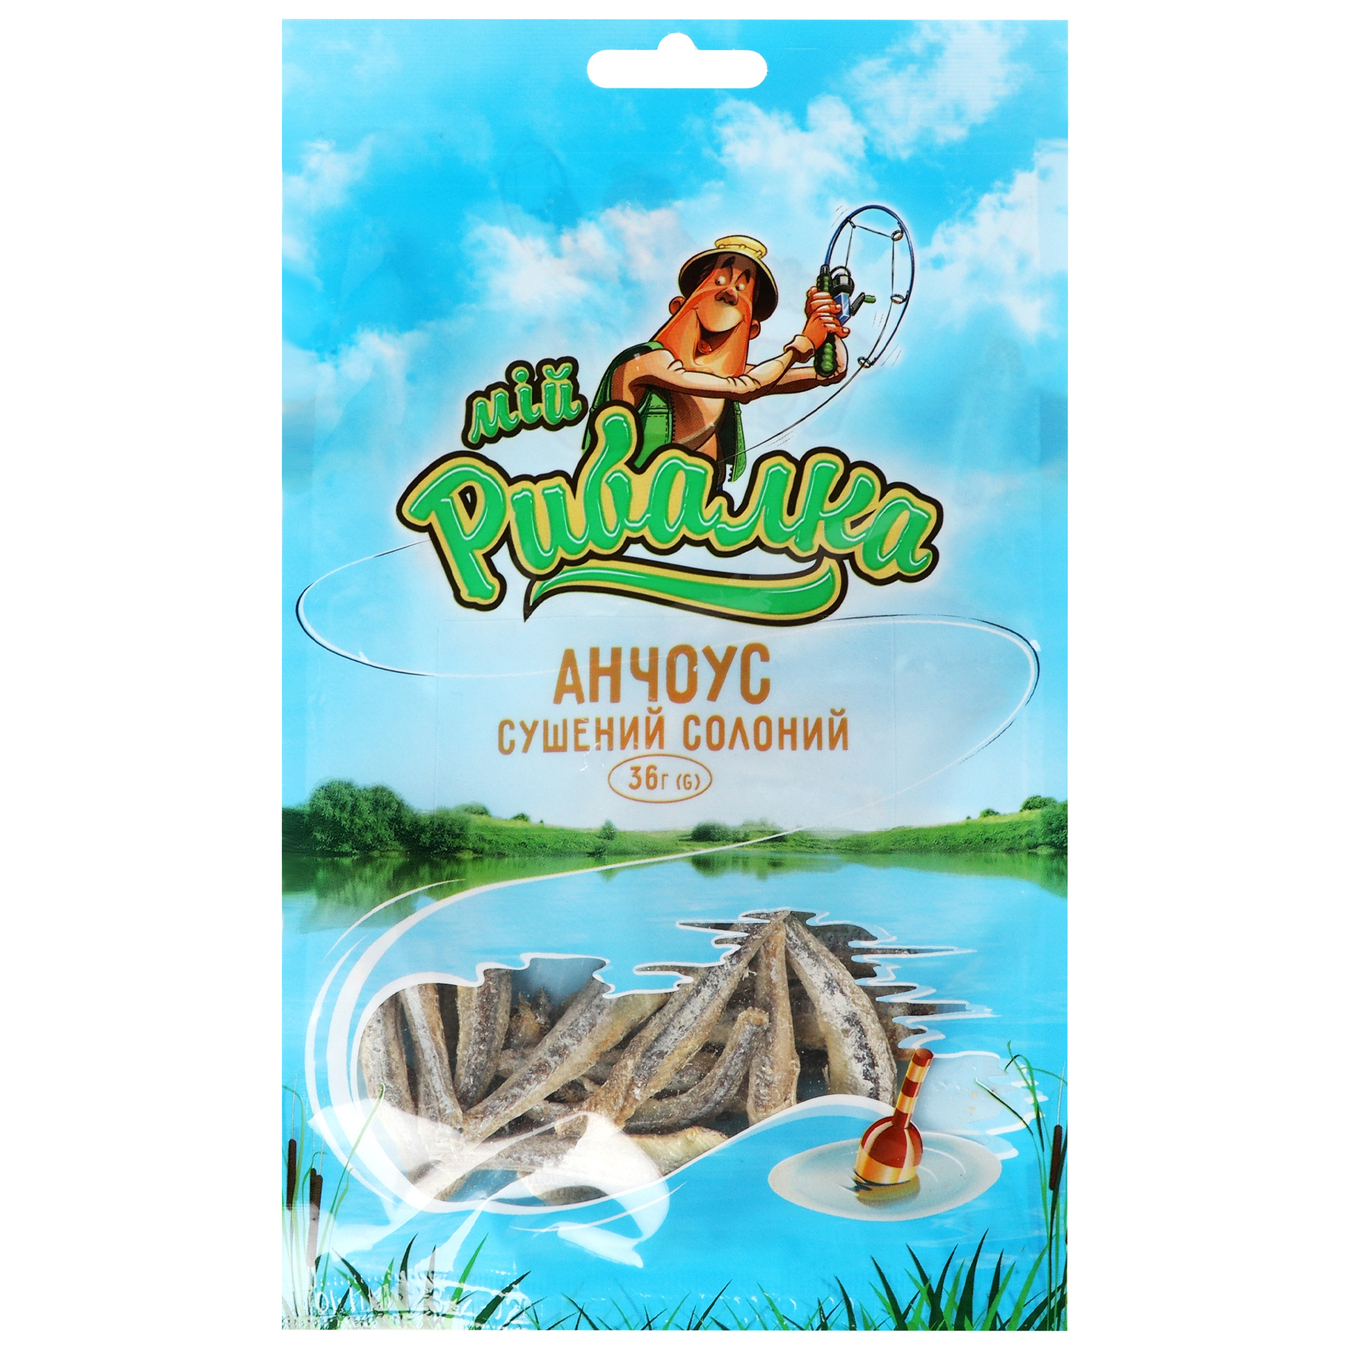 Anchovy My fisherman dried salted 36g